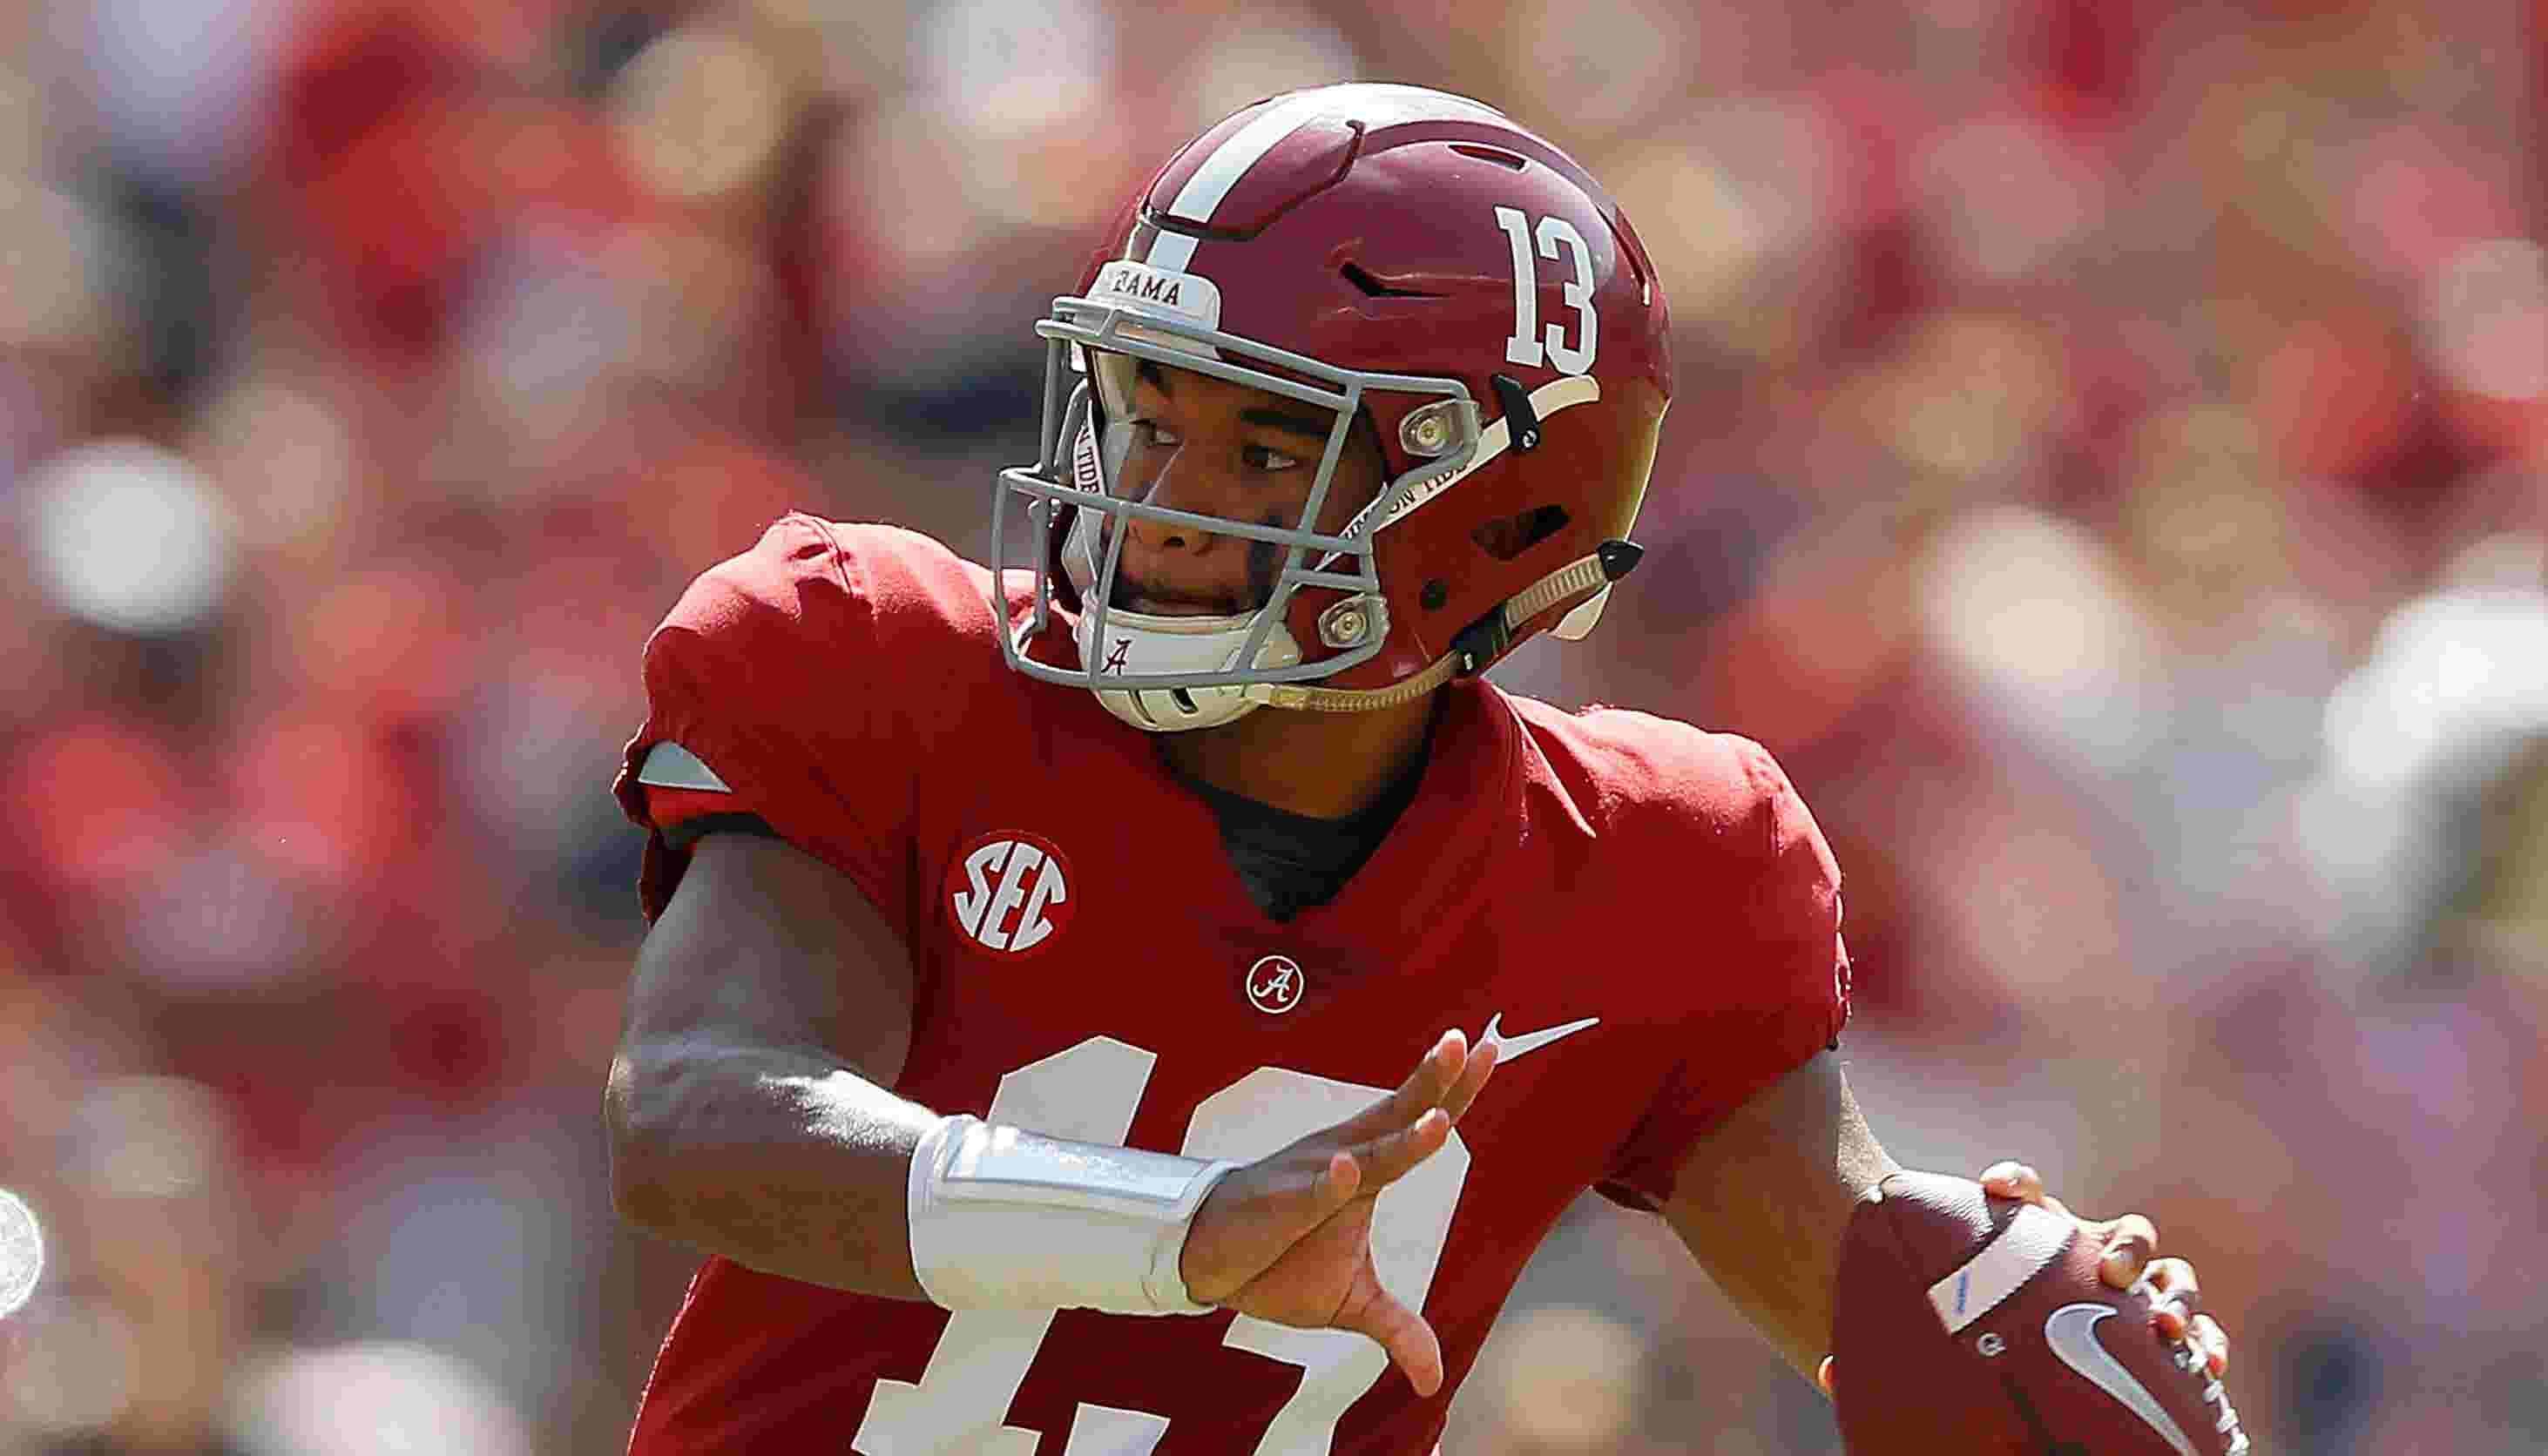 Fan Index: With an elite QB at the helm, Alabama is literally unstoppable